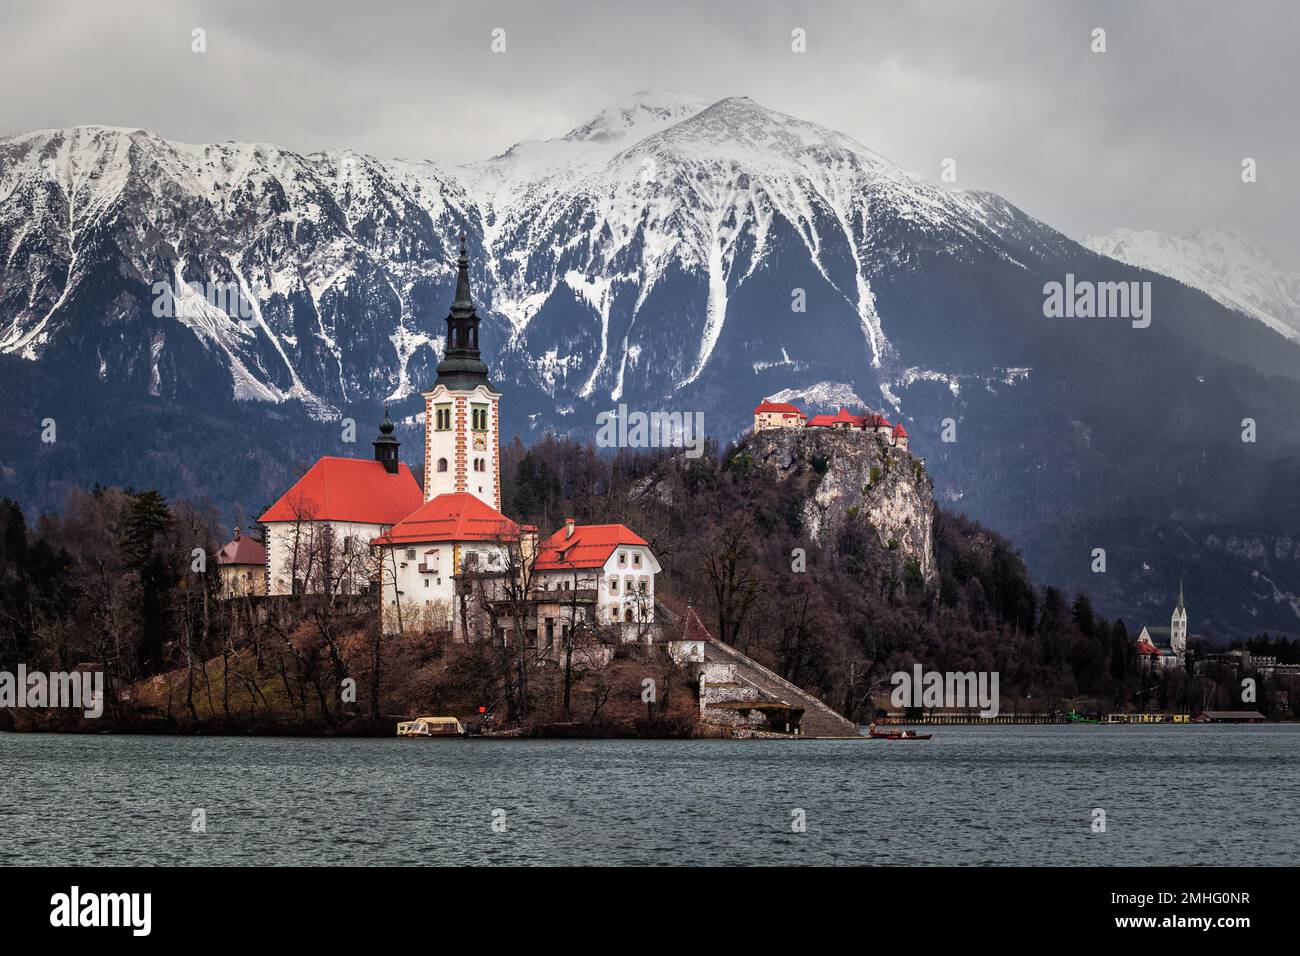 Bled, Slovenia - Beautiful view of Lake Bled (Blejsko Jezero) with Pilgrimage Church of the Assumption of Maria on Bled Island, Bled Castle and snowy Stock Photo